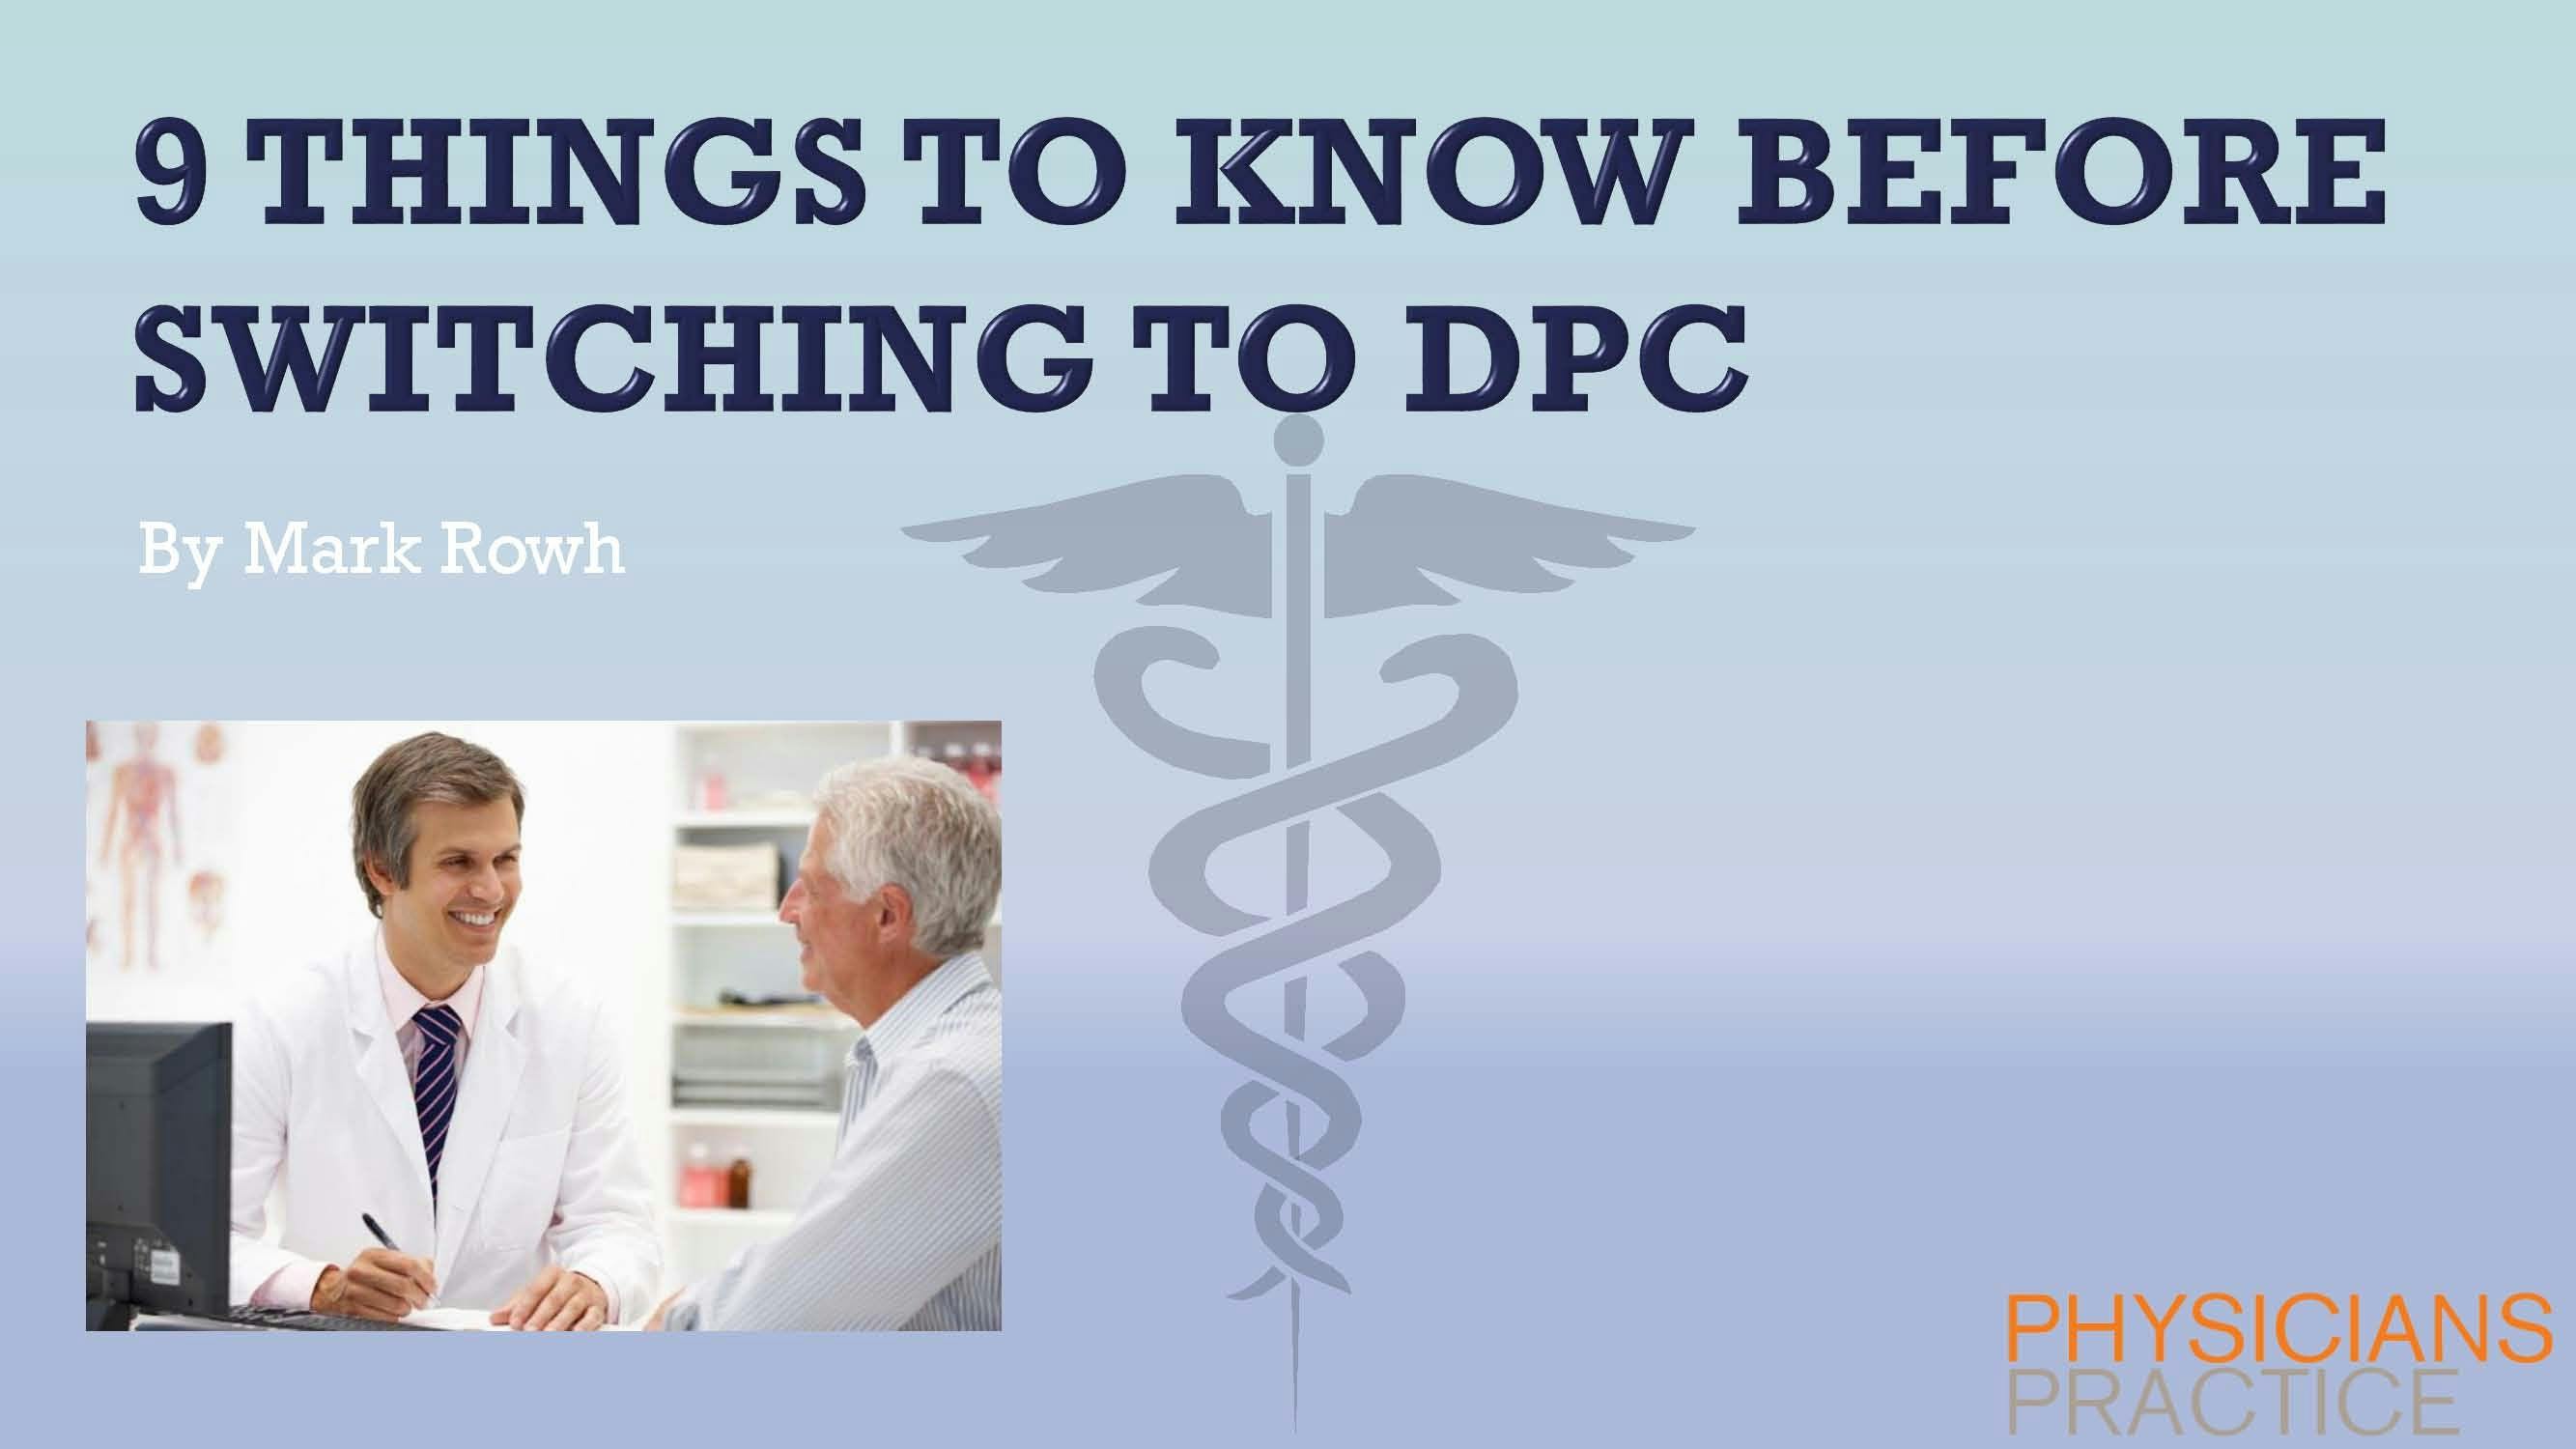 9 Things to Know Before Switching to DPC